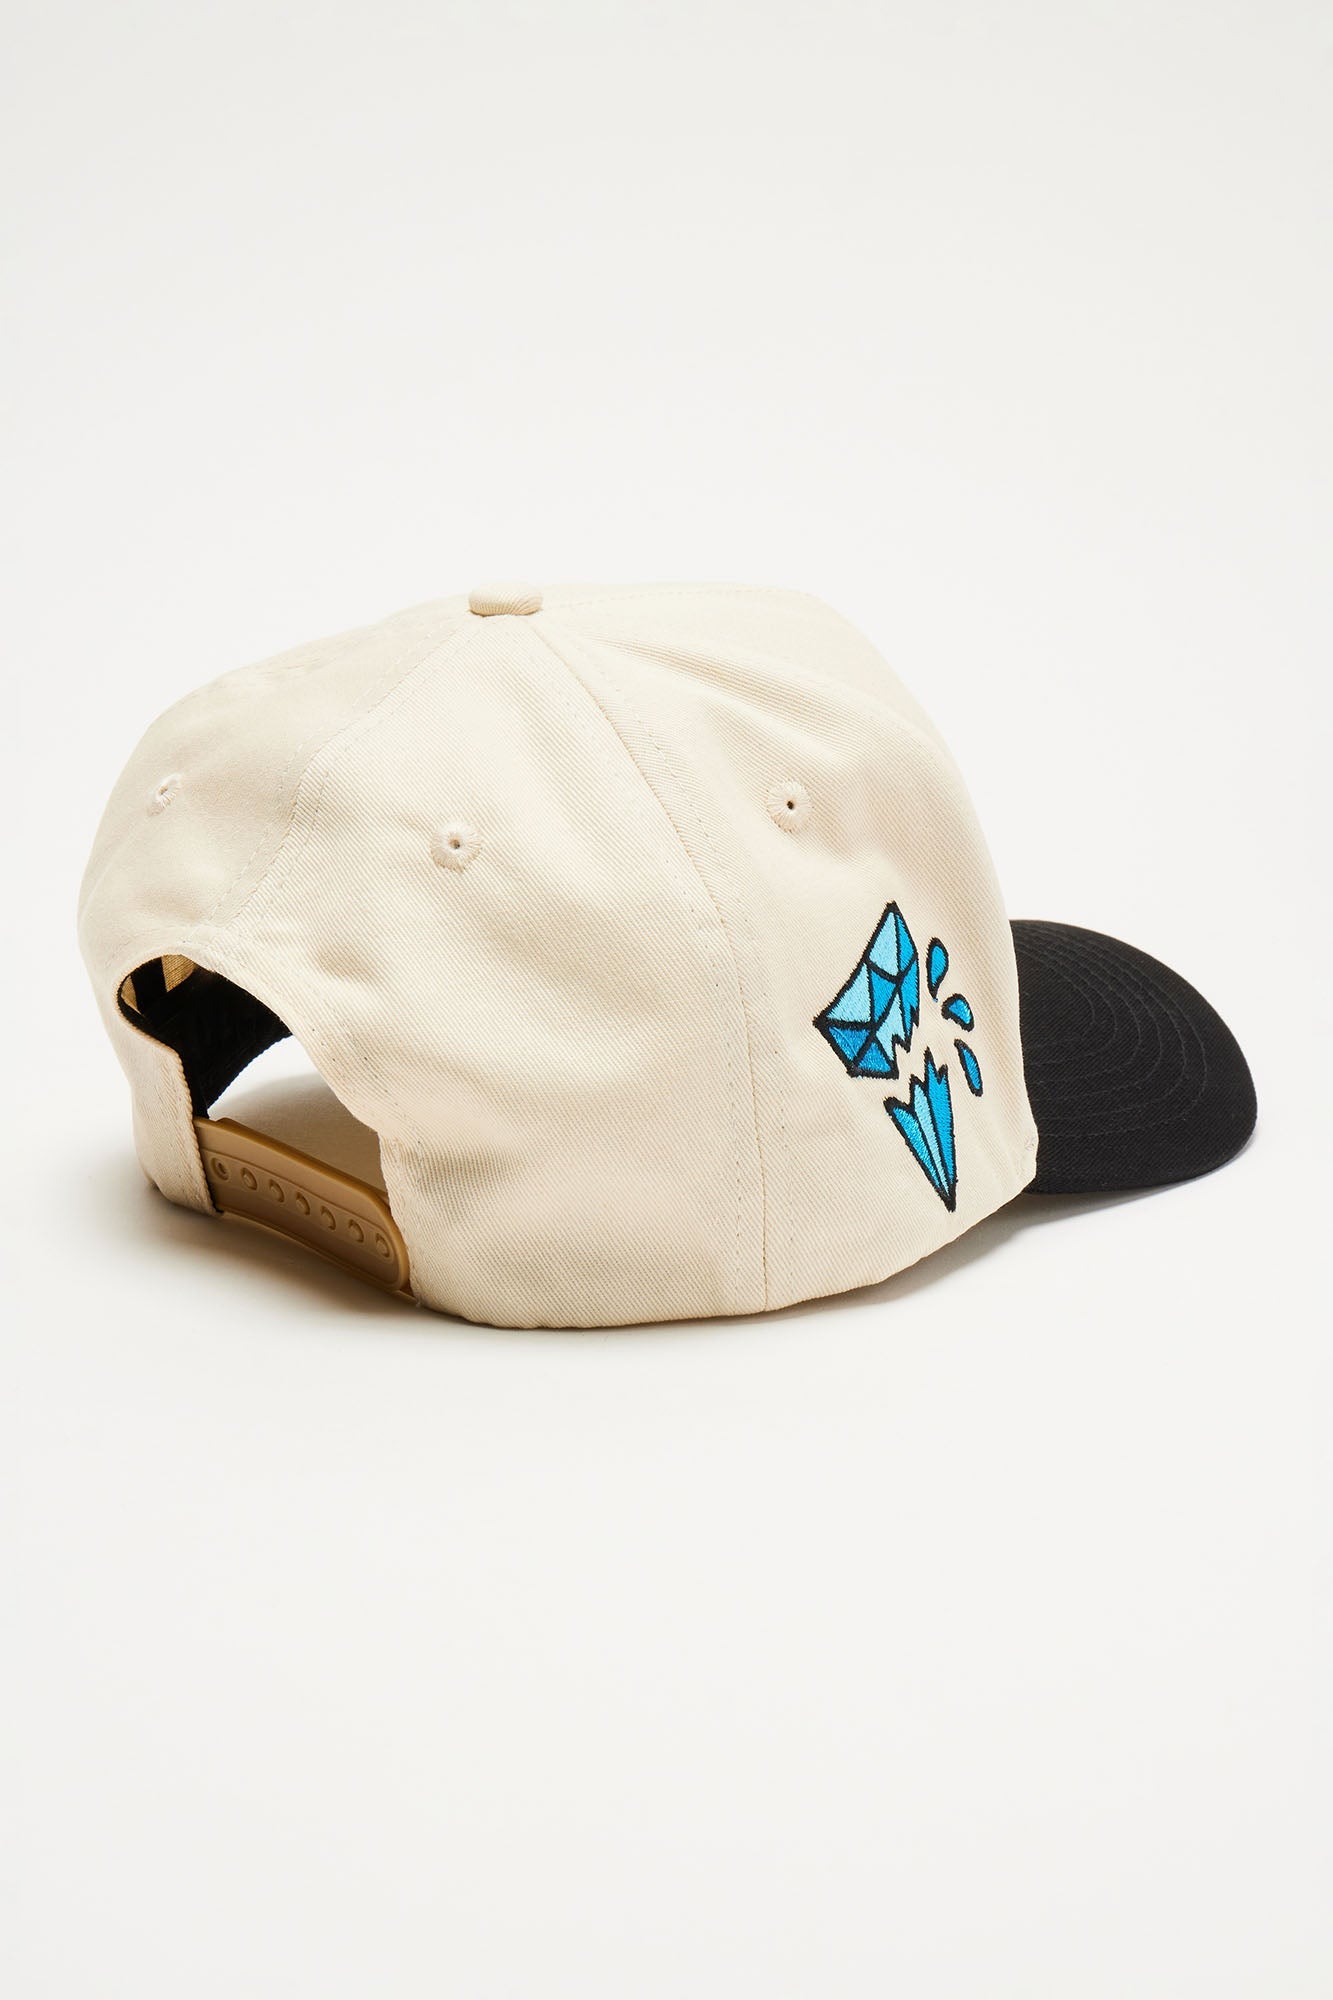 Tan-Tastic: The Most Overdue Snapback Hat